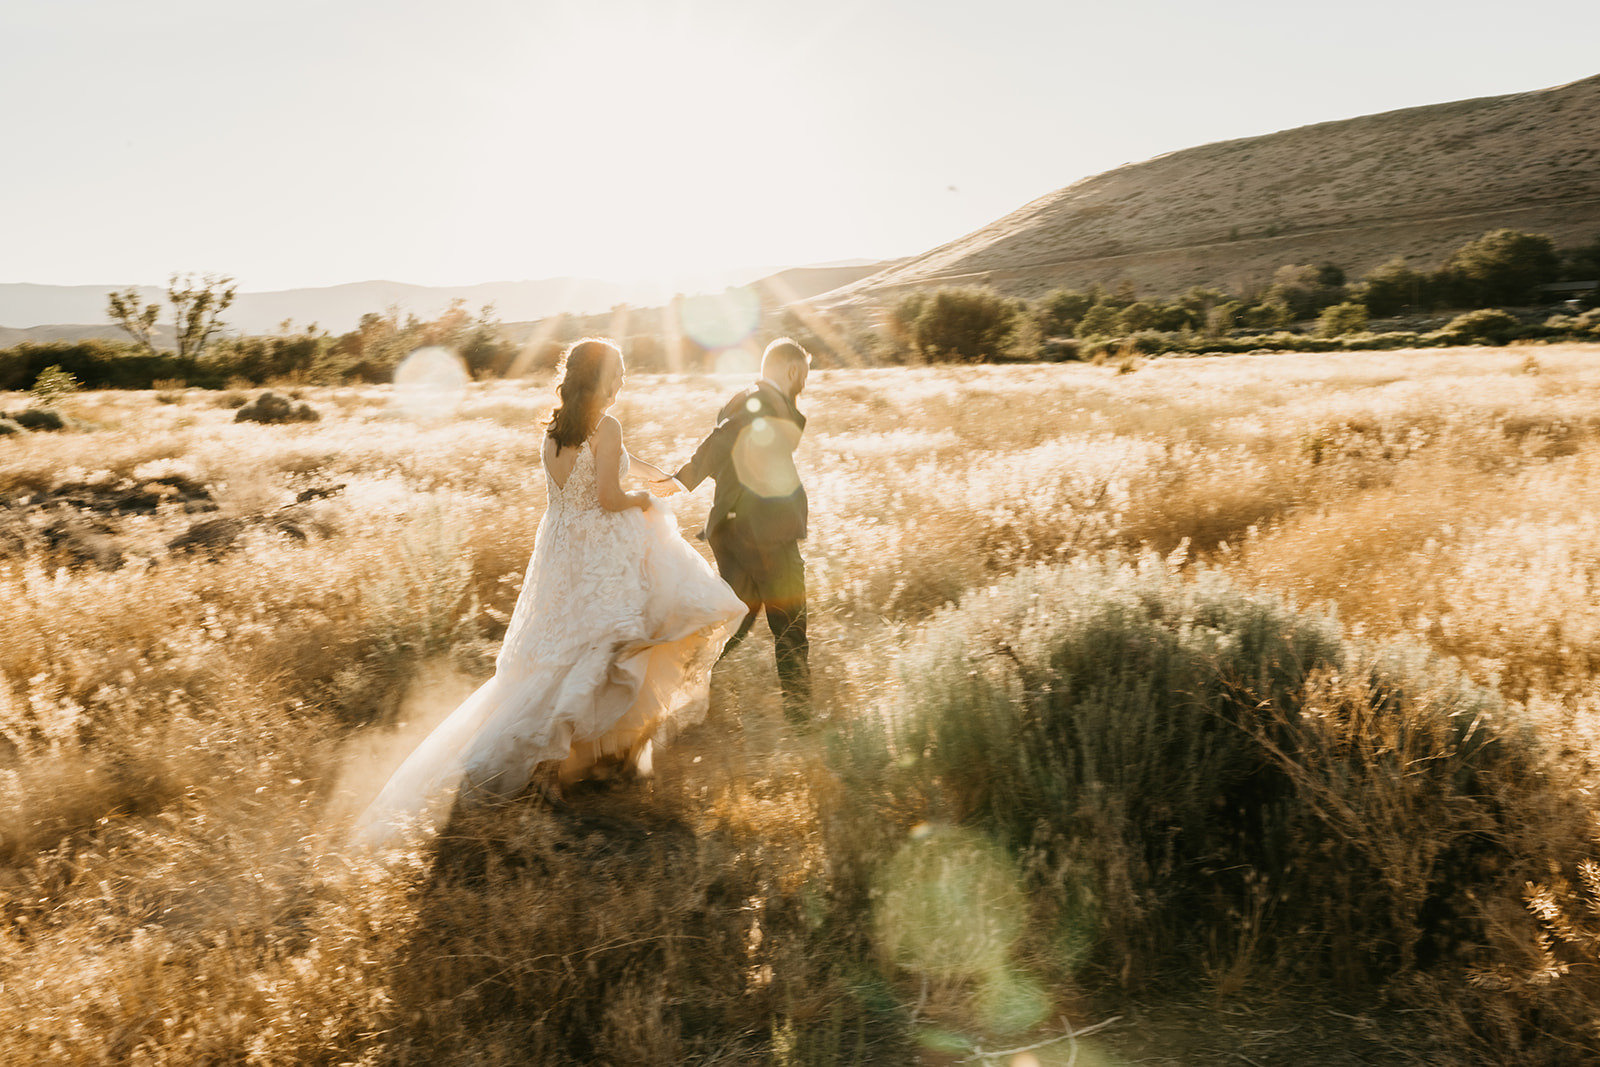 Bride and groom take couples photos in a golden field in Reno Nevada